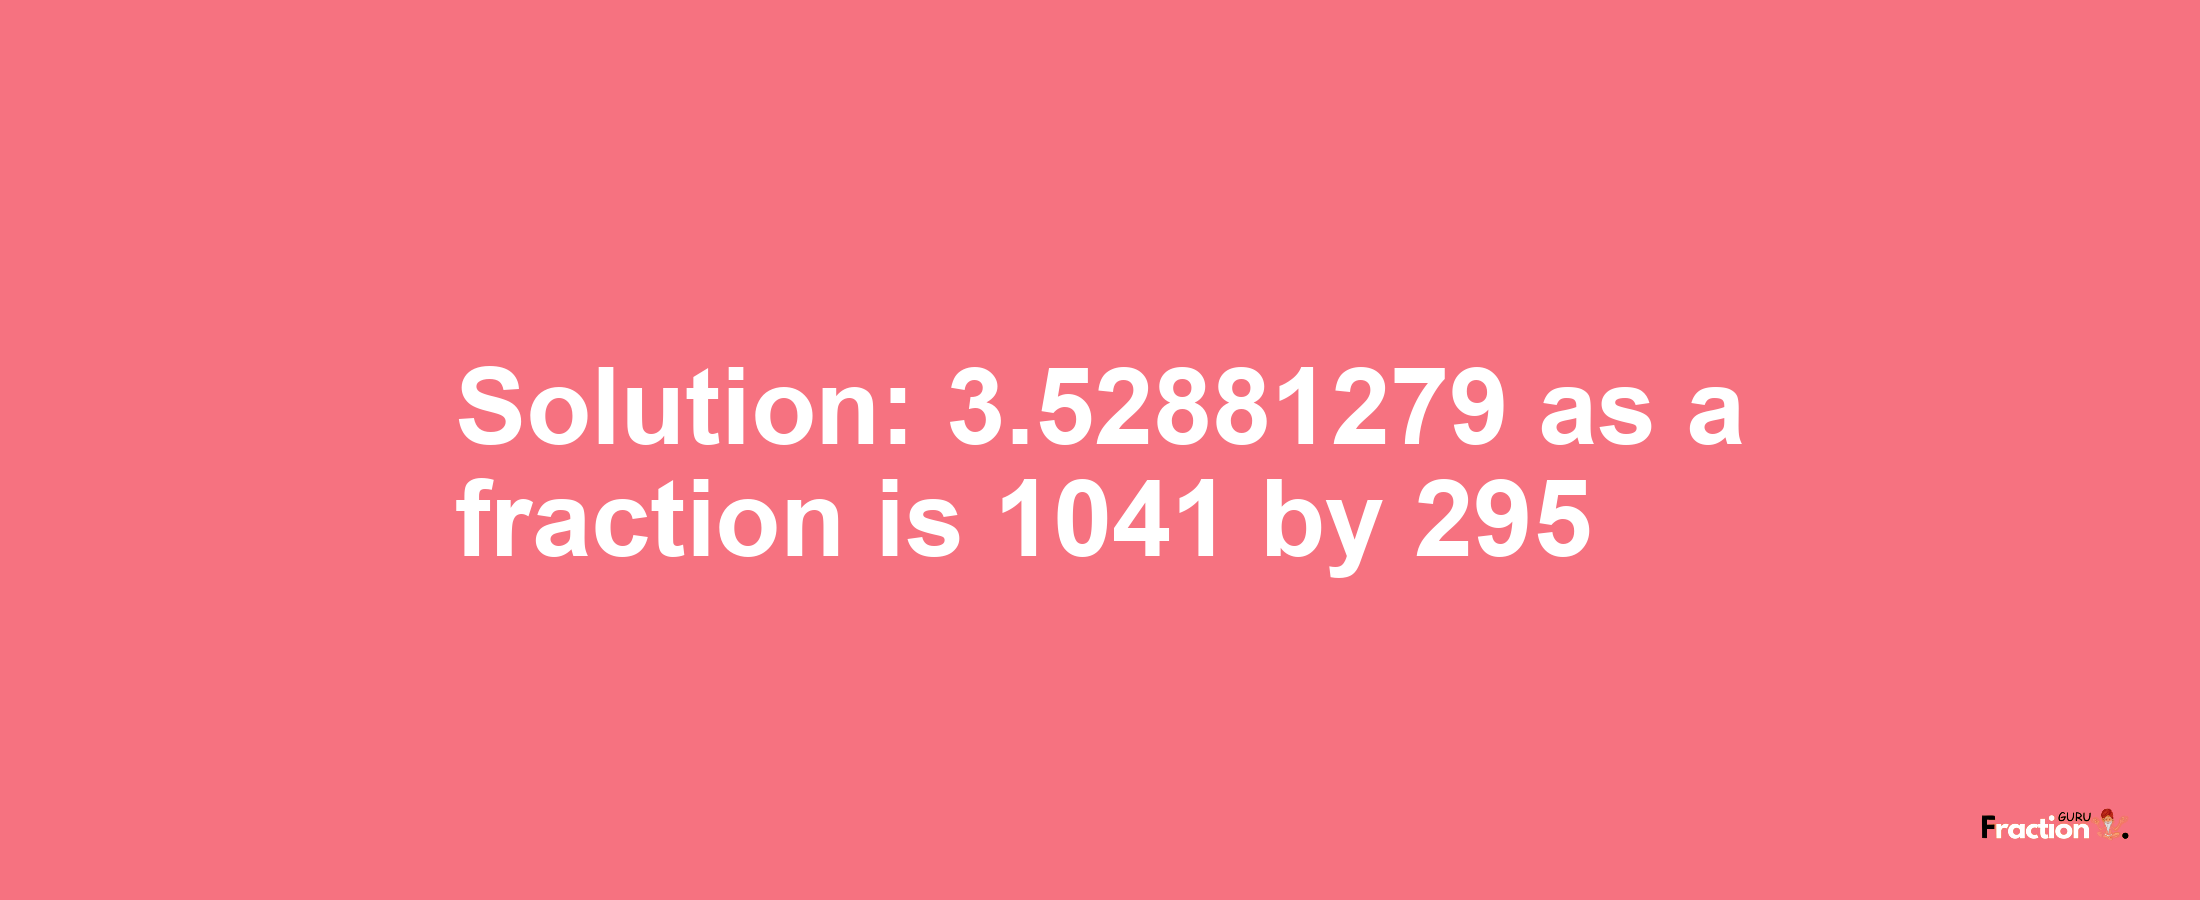 Solution:3.52881279 as a fraction is 1041/295